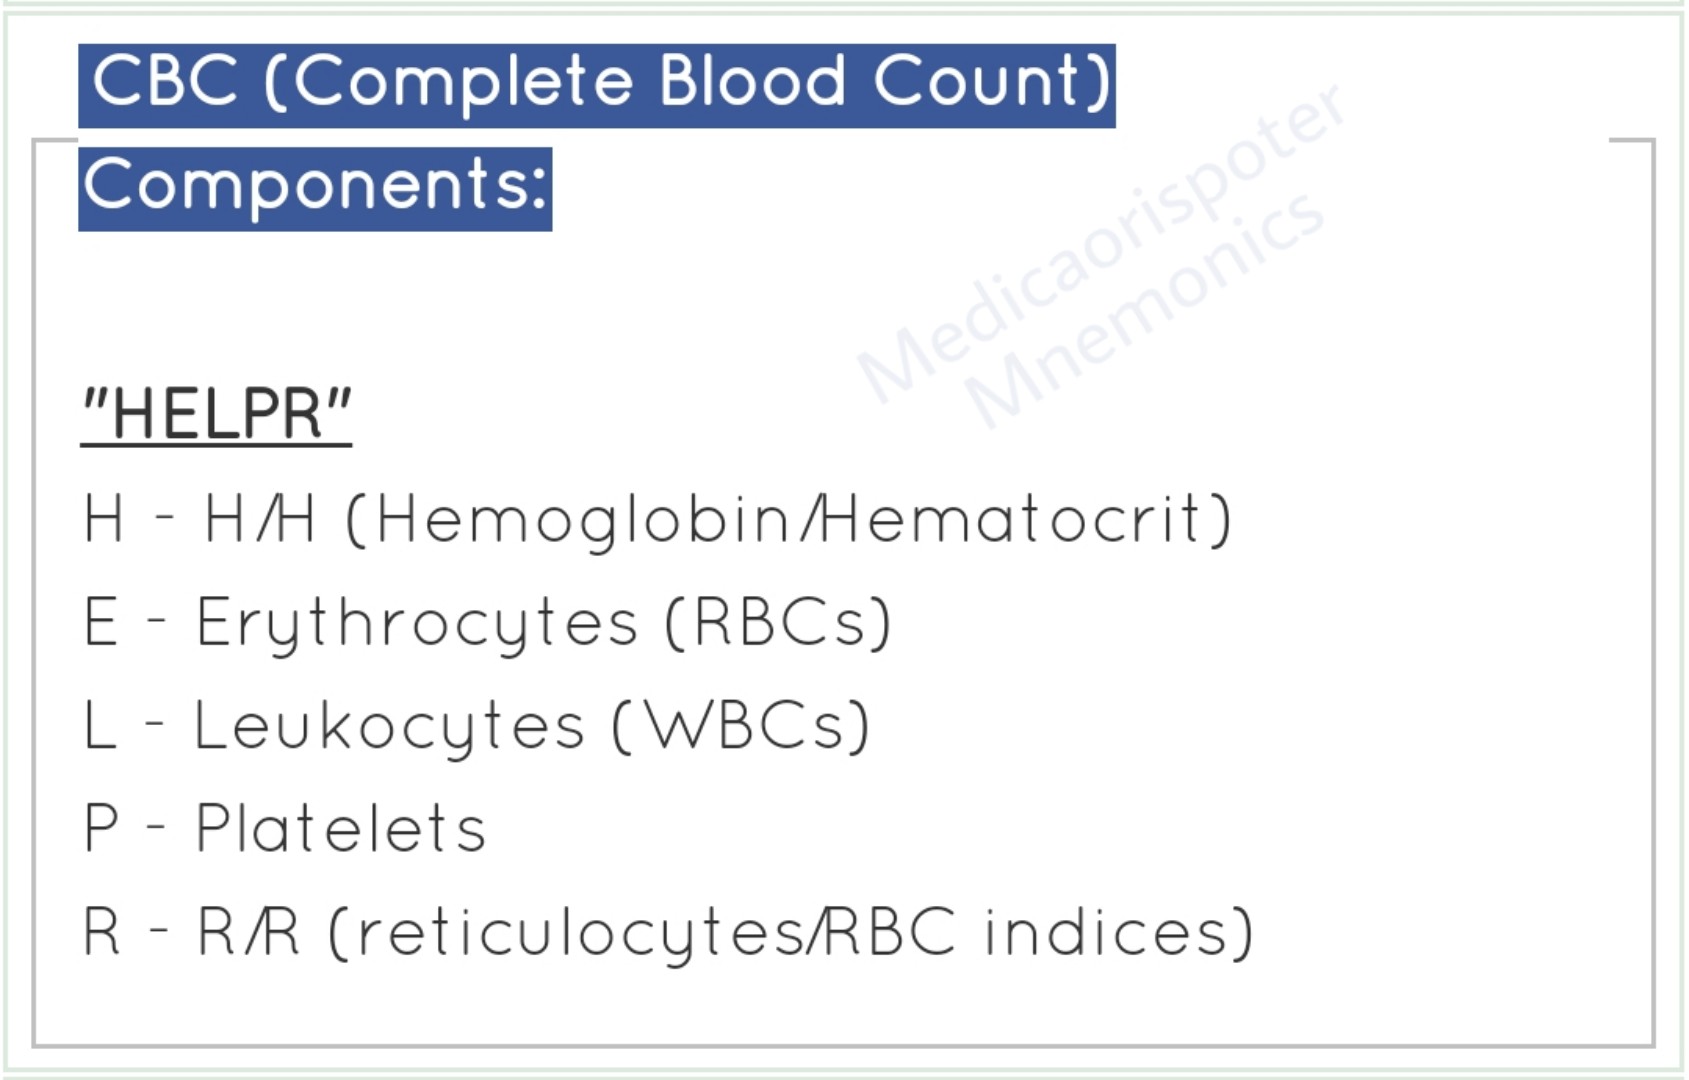 Components of Complete Blood Count